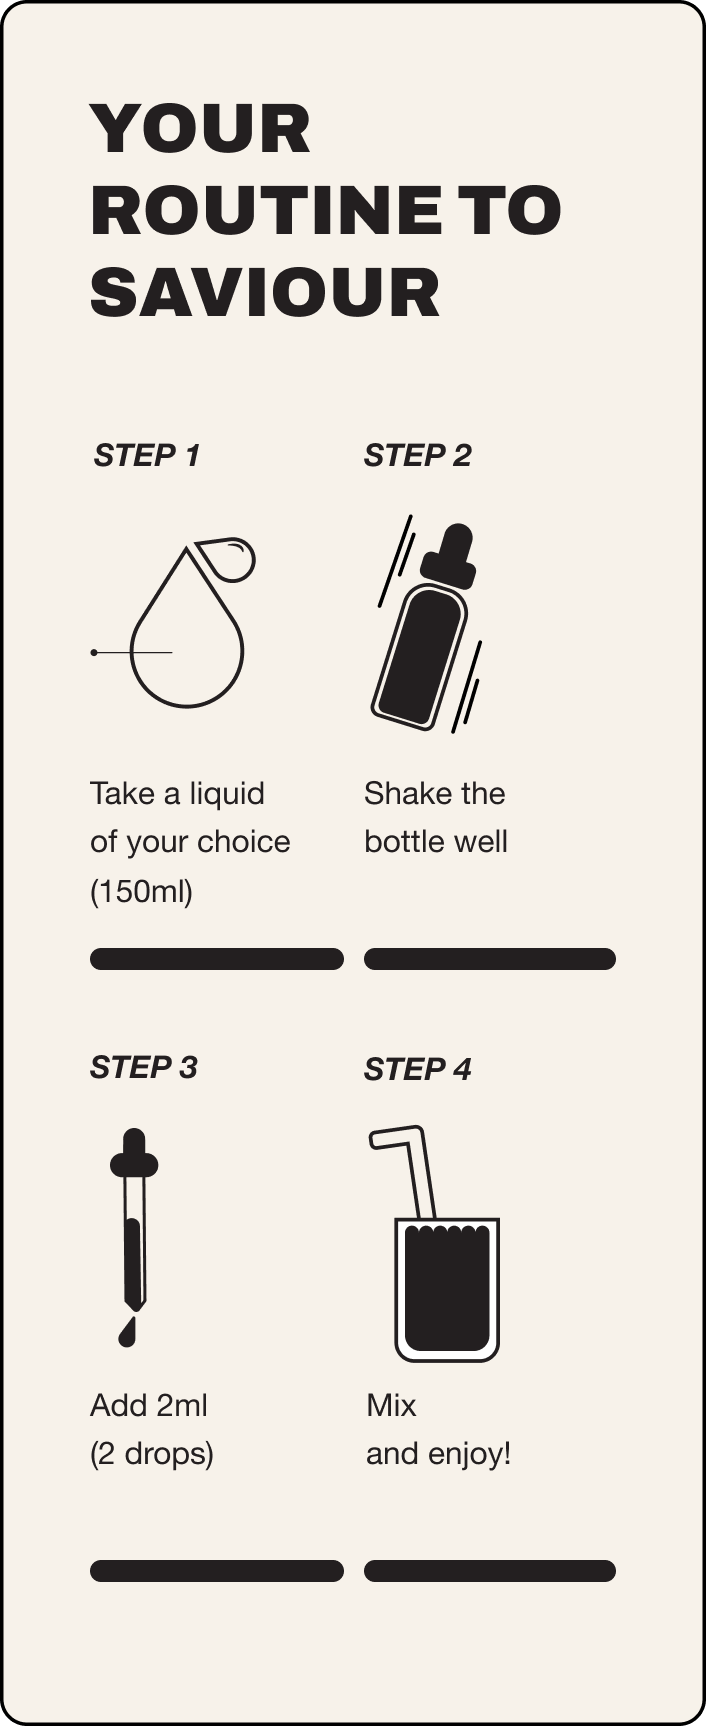 Your guide to saviour. Step 1 take a liquid of your choice 100ml, step 2 shake the bottle well, step 3 add 2ml (2 drops), step 4 mix and enjoy!